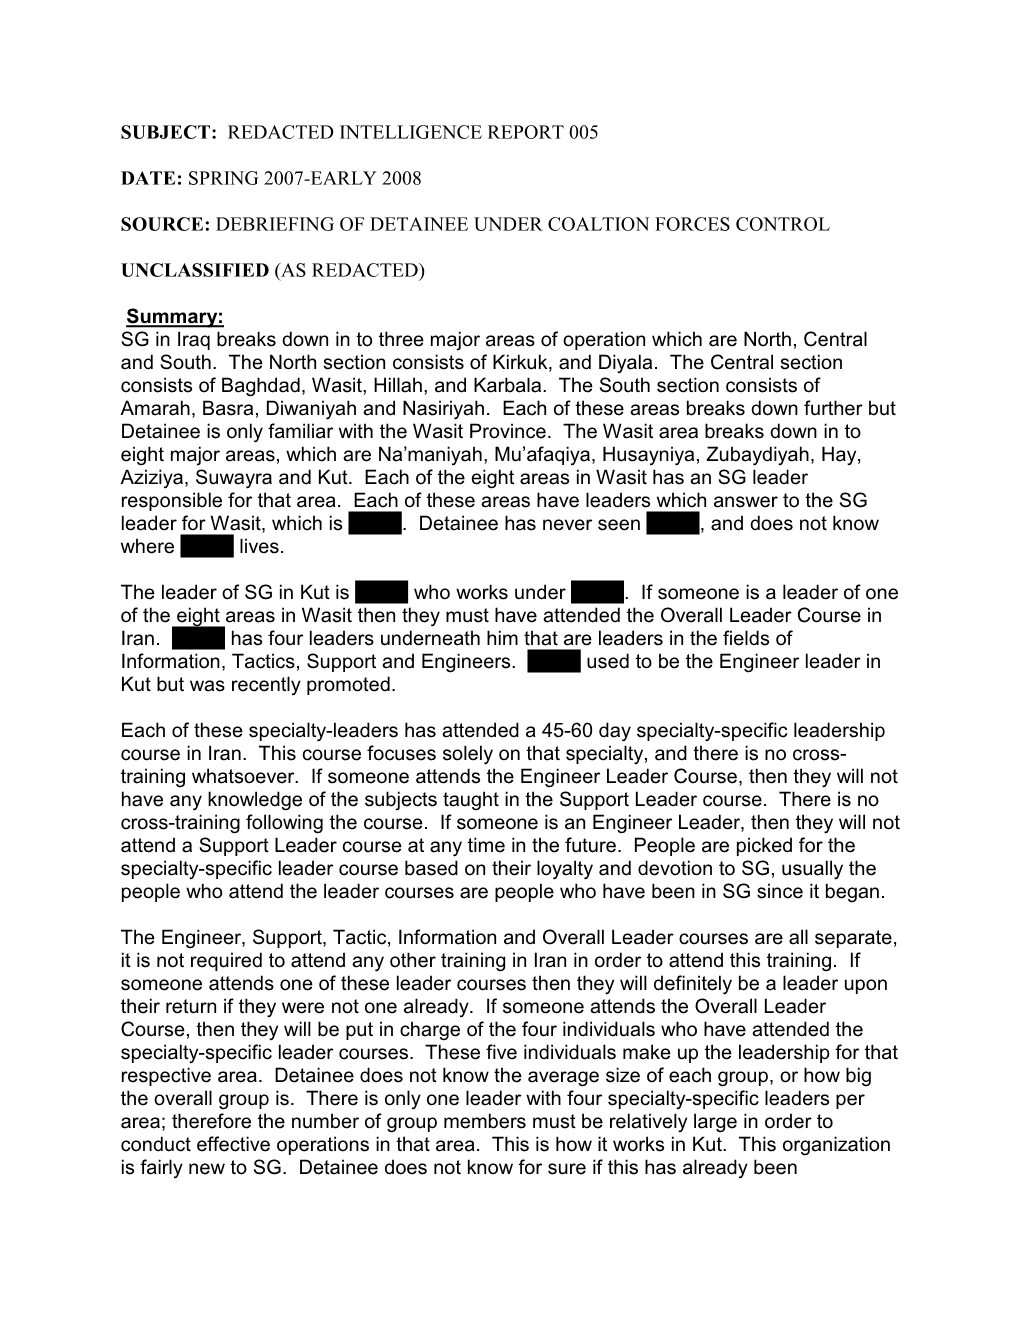 Subject: Redacted Intelligence Report 005 Date: Spring 2007-Early 2008 Source: Debriefing of Detainee Under Coaltion Forces